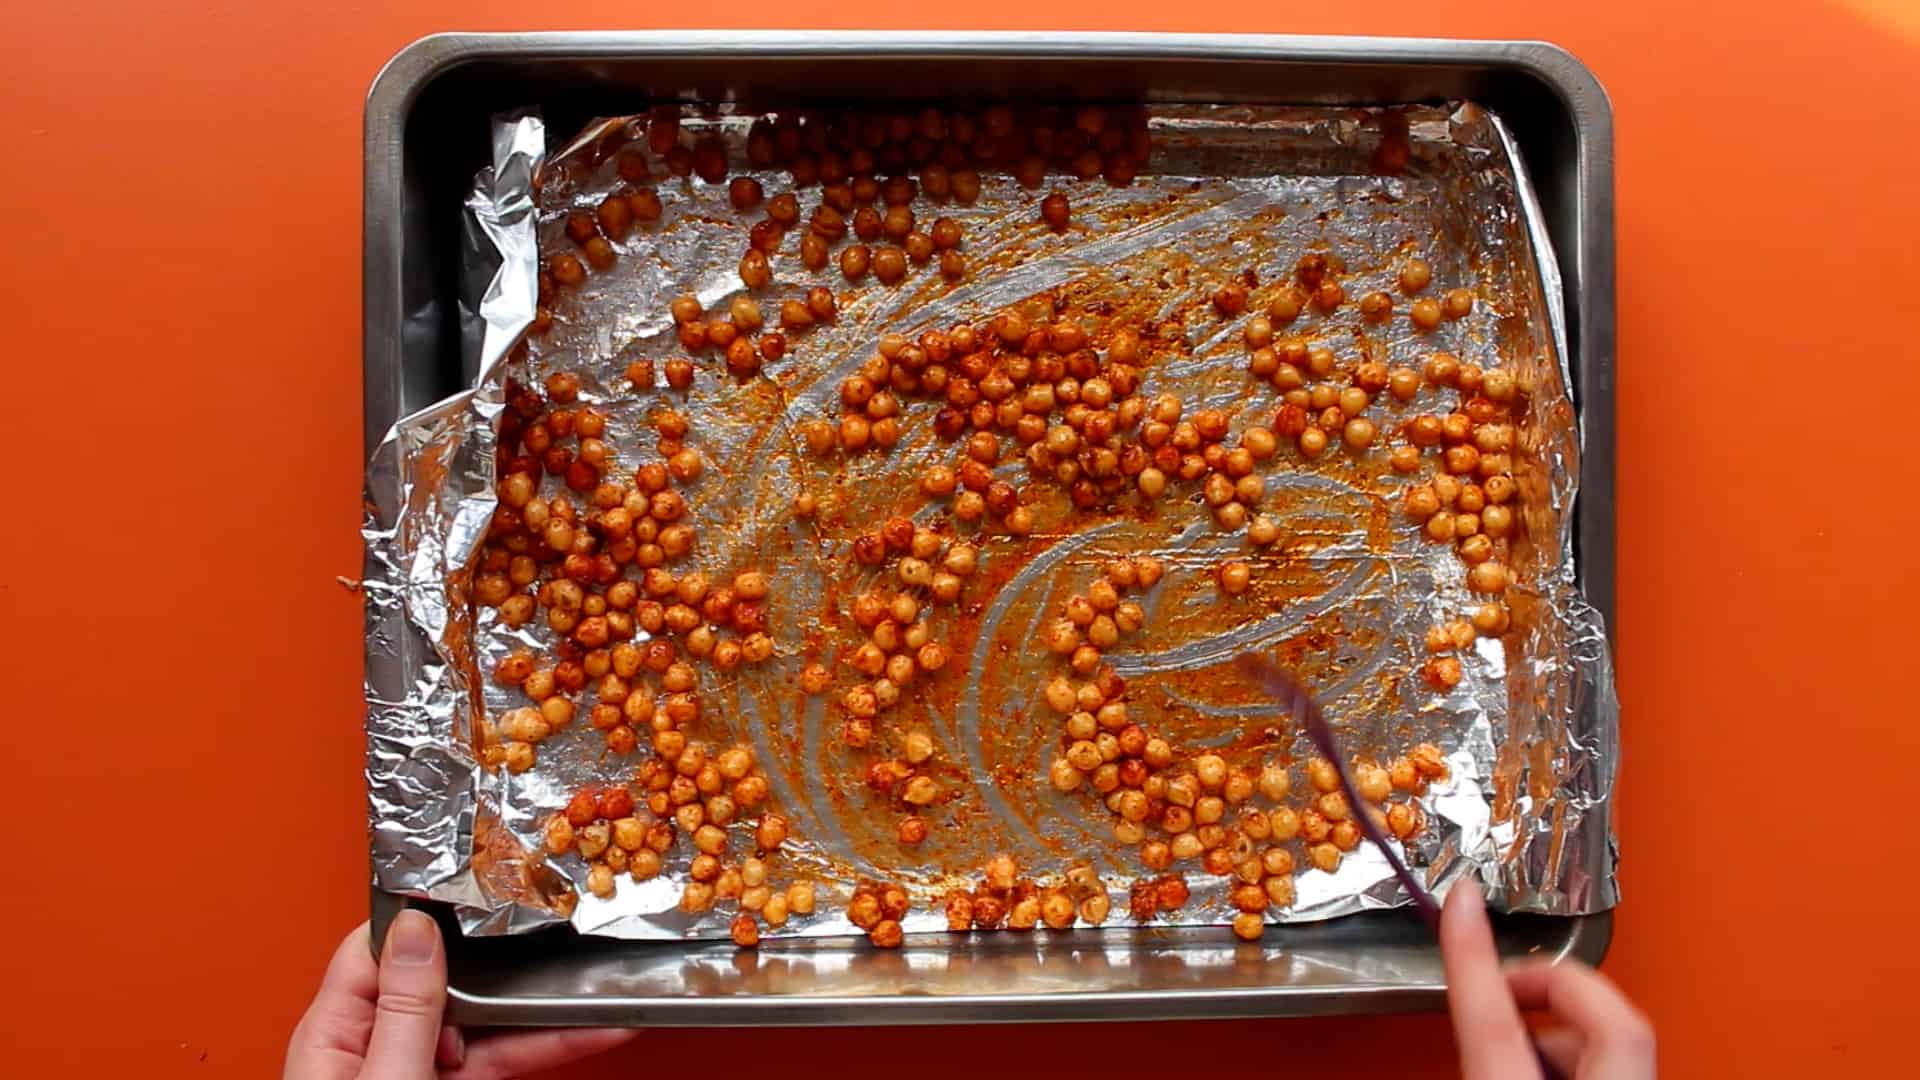 Chick peas scattered over a foil lined baking tray with the spices being mixed in.